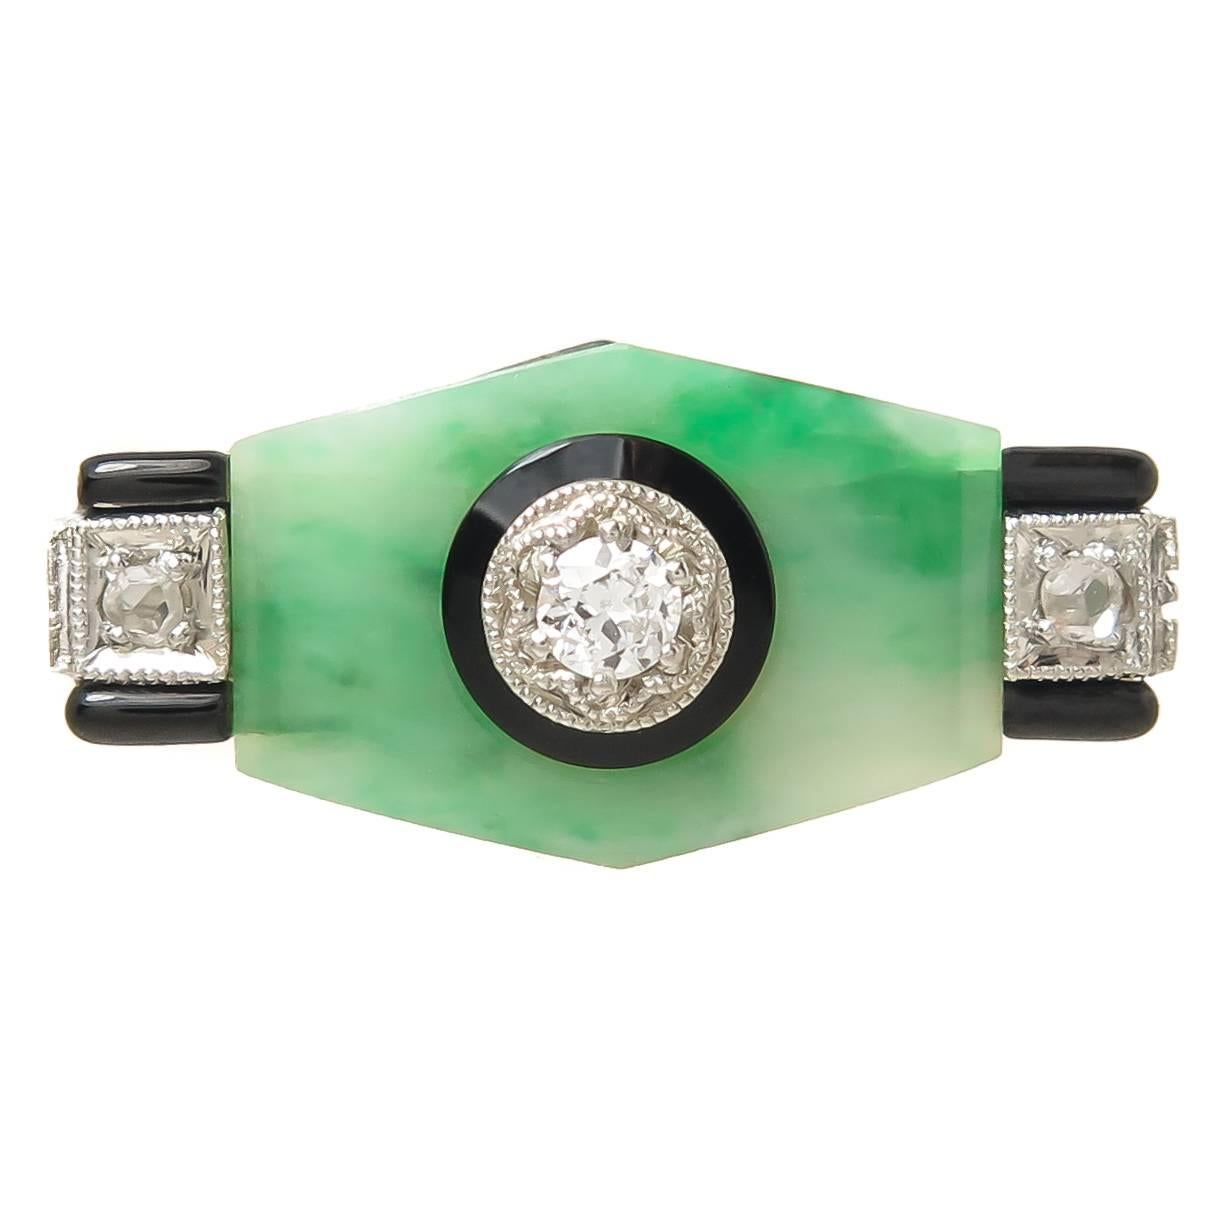 Circa 1930 Art Deco Ring, with a center section of Jade, Black Onyx and further decorated with Black Enamel and set with Old cut Diamonds. The top of the ring measures 3/4 inch in length and 3/8 inch wide. Finger size = 6. Excellent near unworn